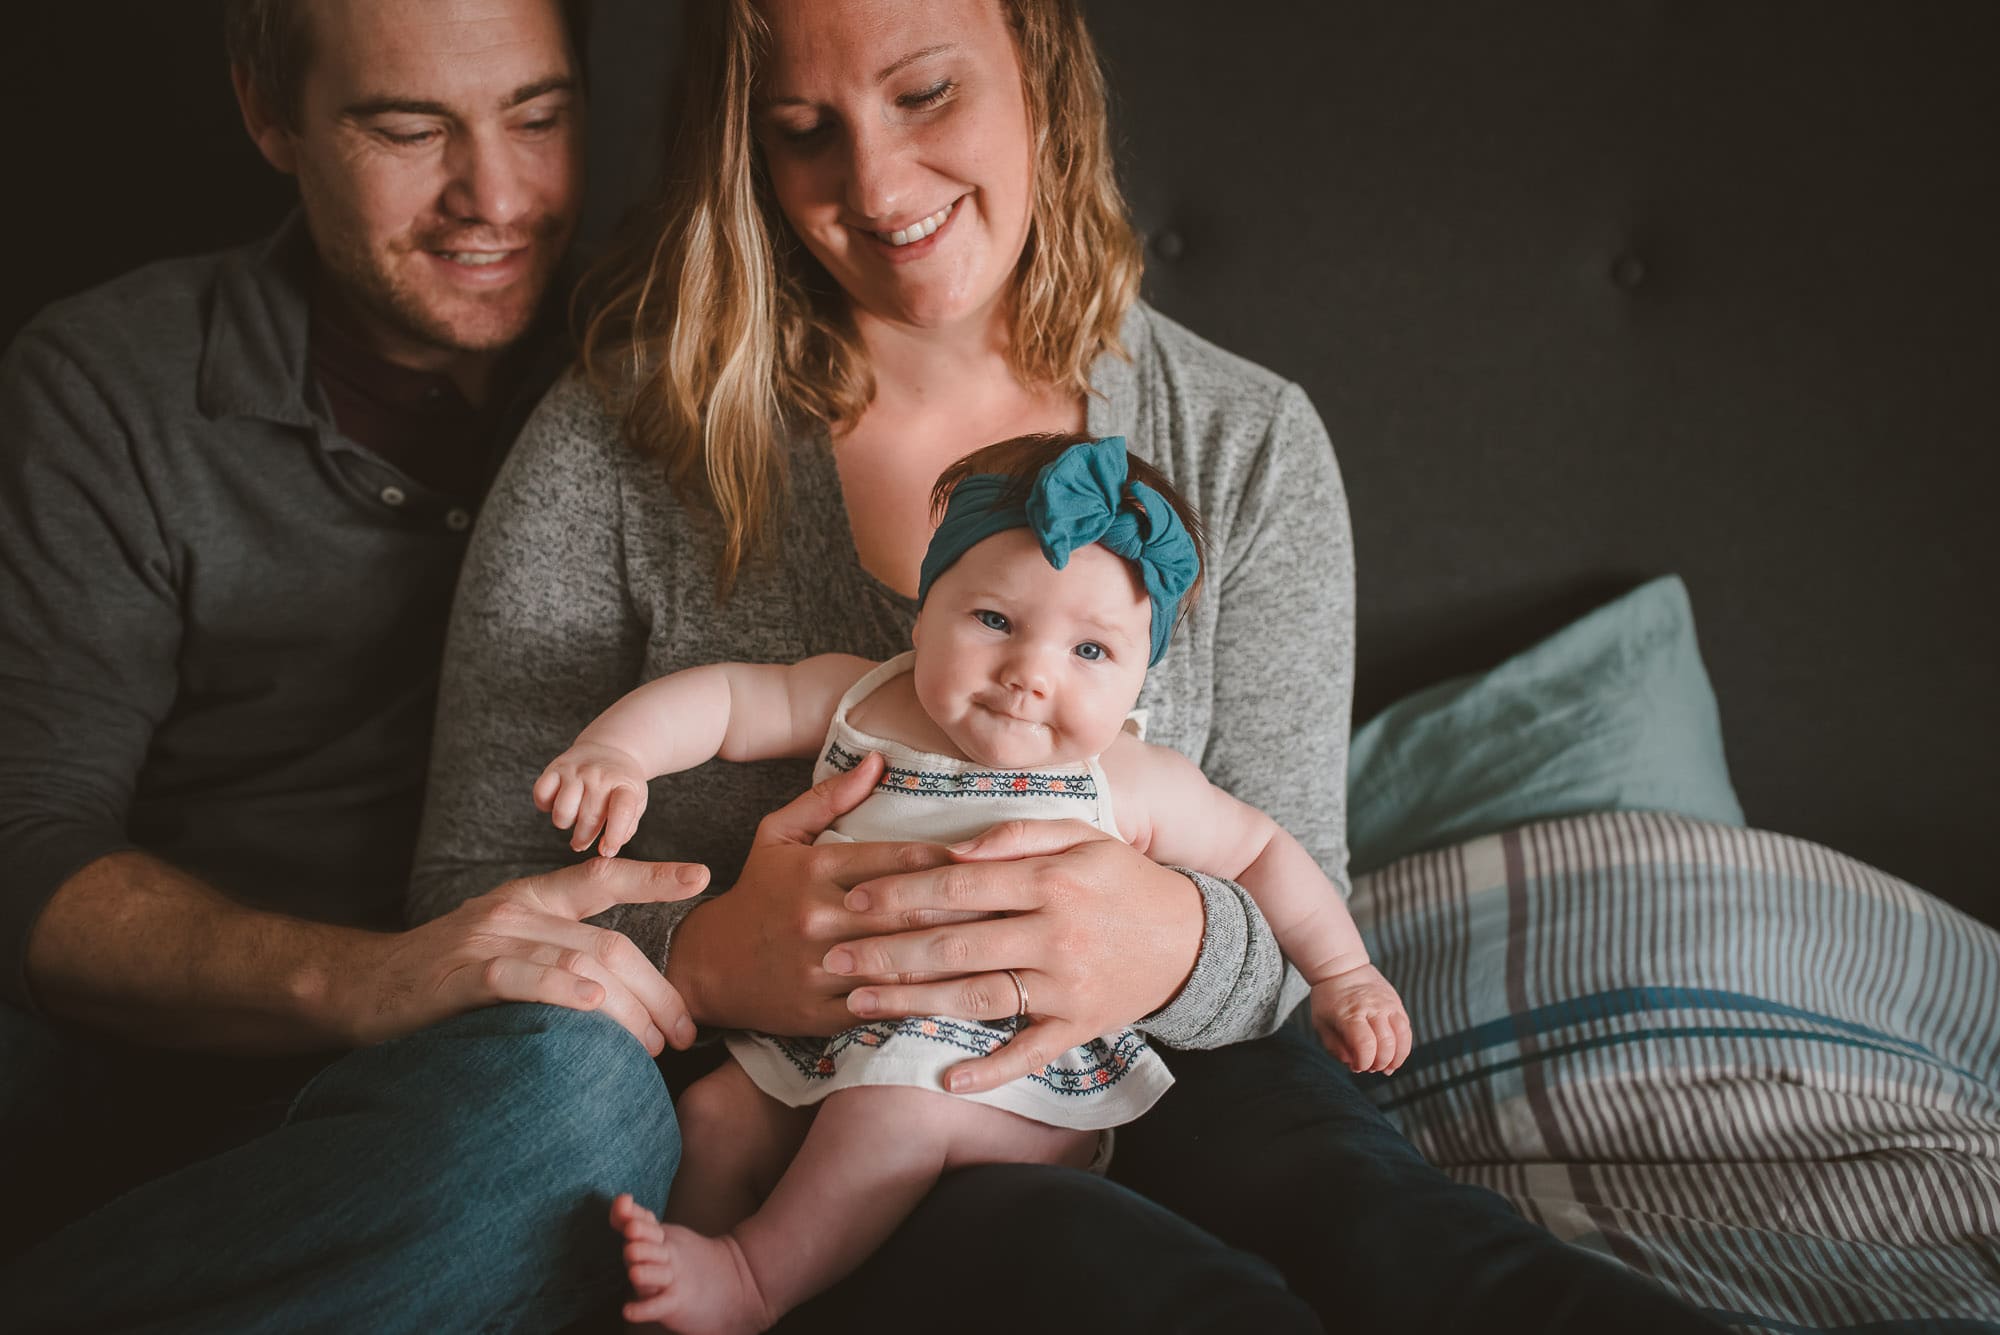 Vancouver Family Photographer captures lots of laughs with parents and baby